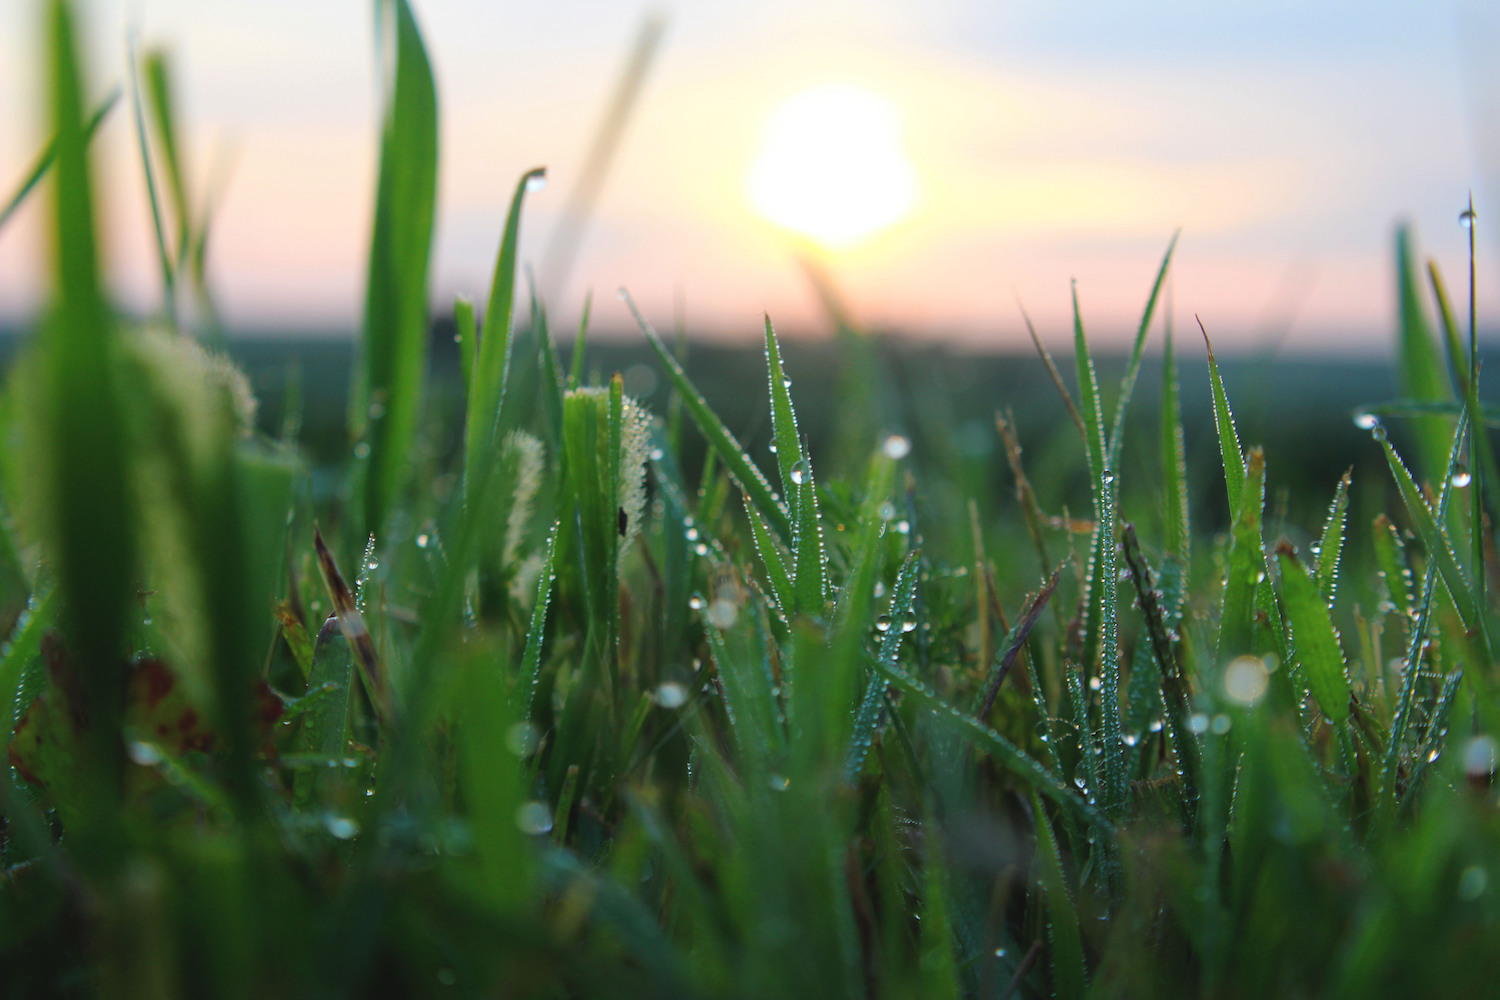 A field view with dew on grass